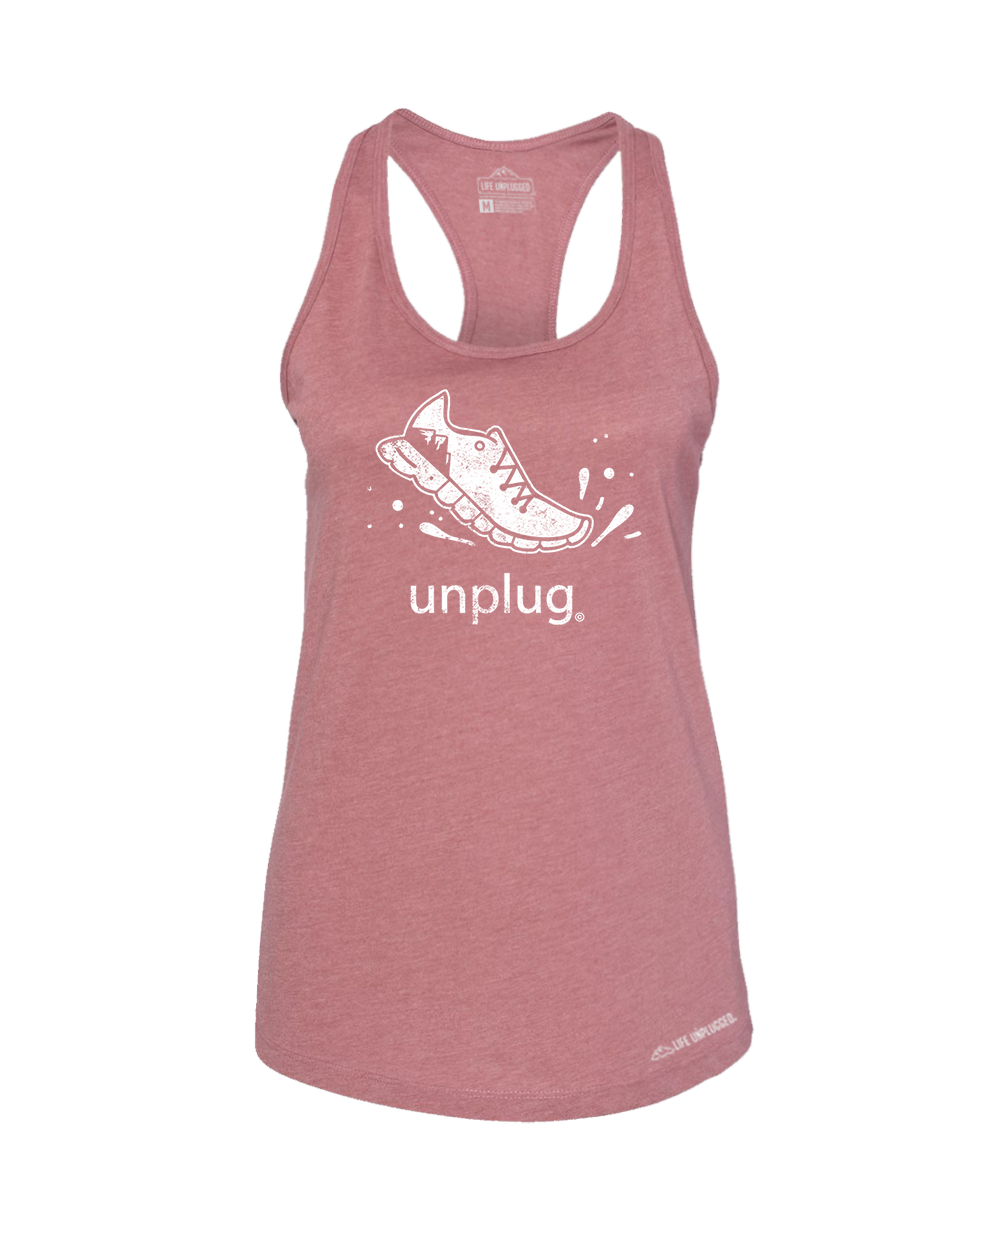 Running Premium Women's Relaxed Fit Racerback Tank Top - Life Unplugged